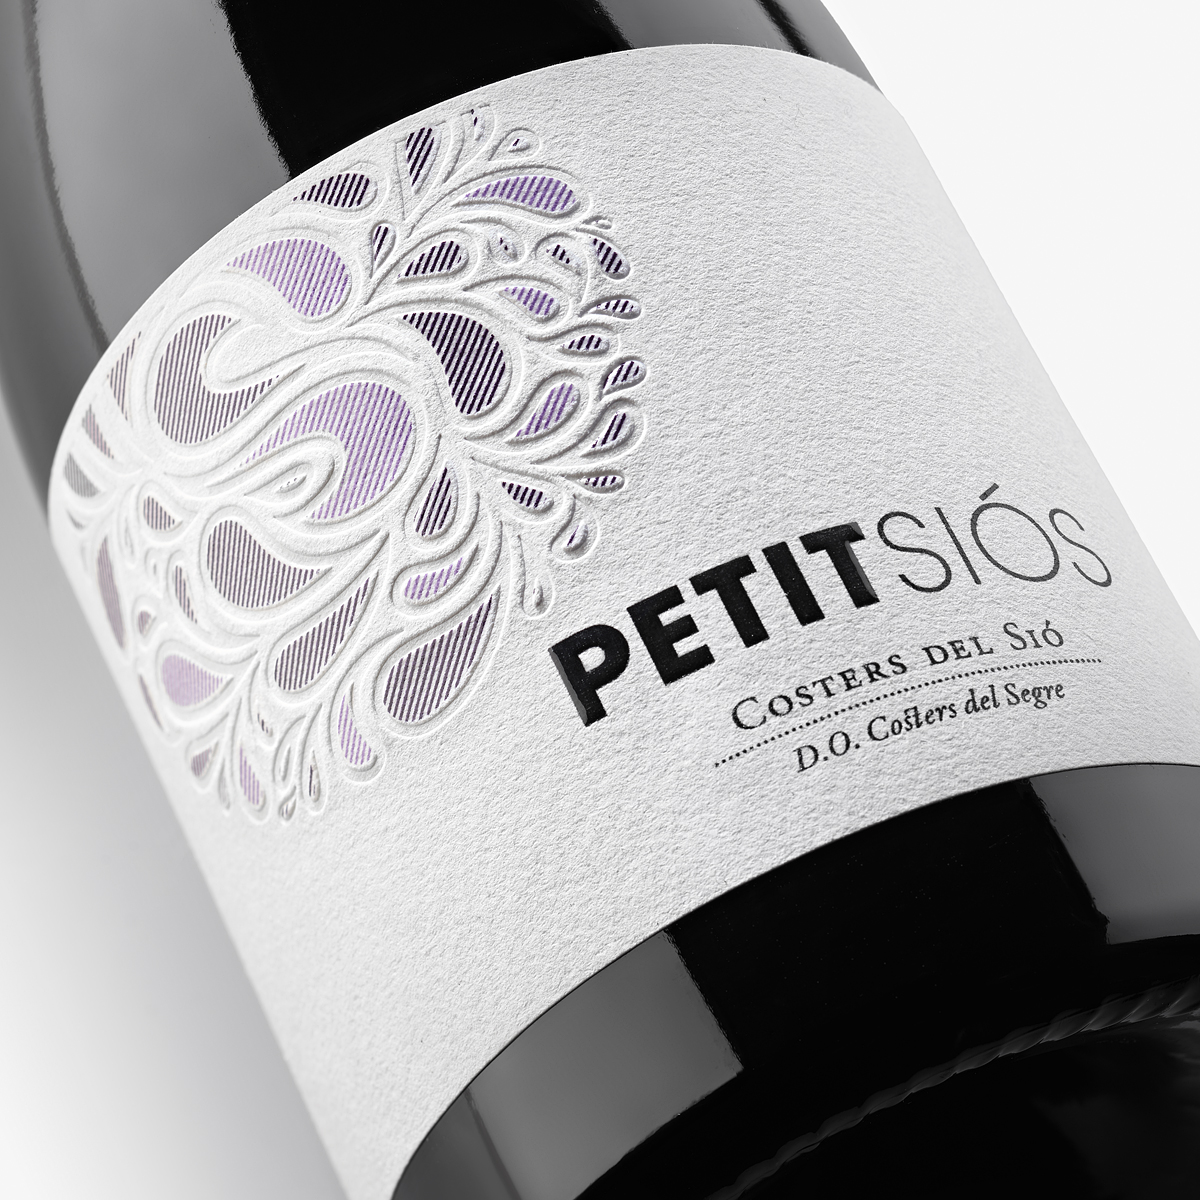 Red wine Petit Siós label | Costers del Sió Winery